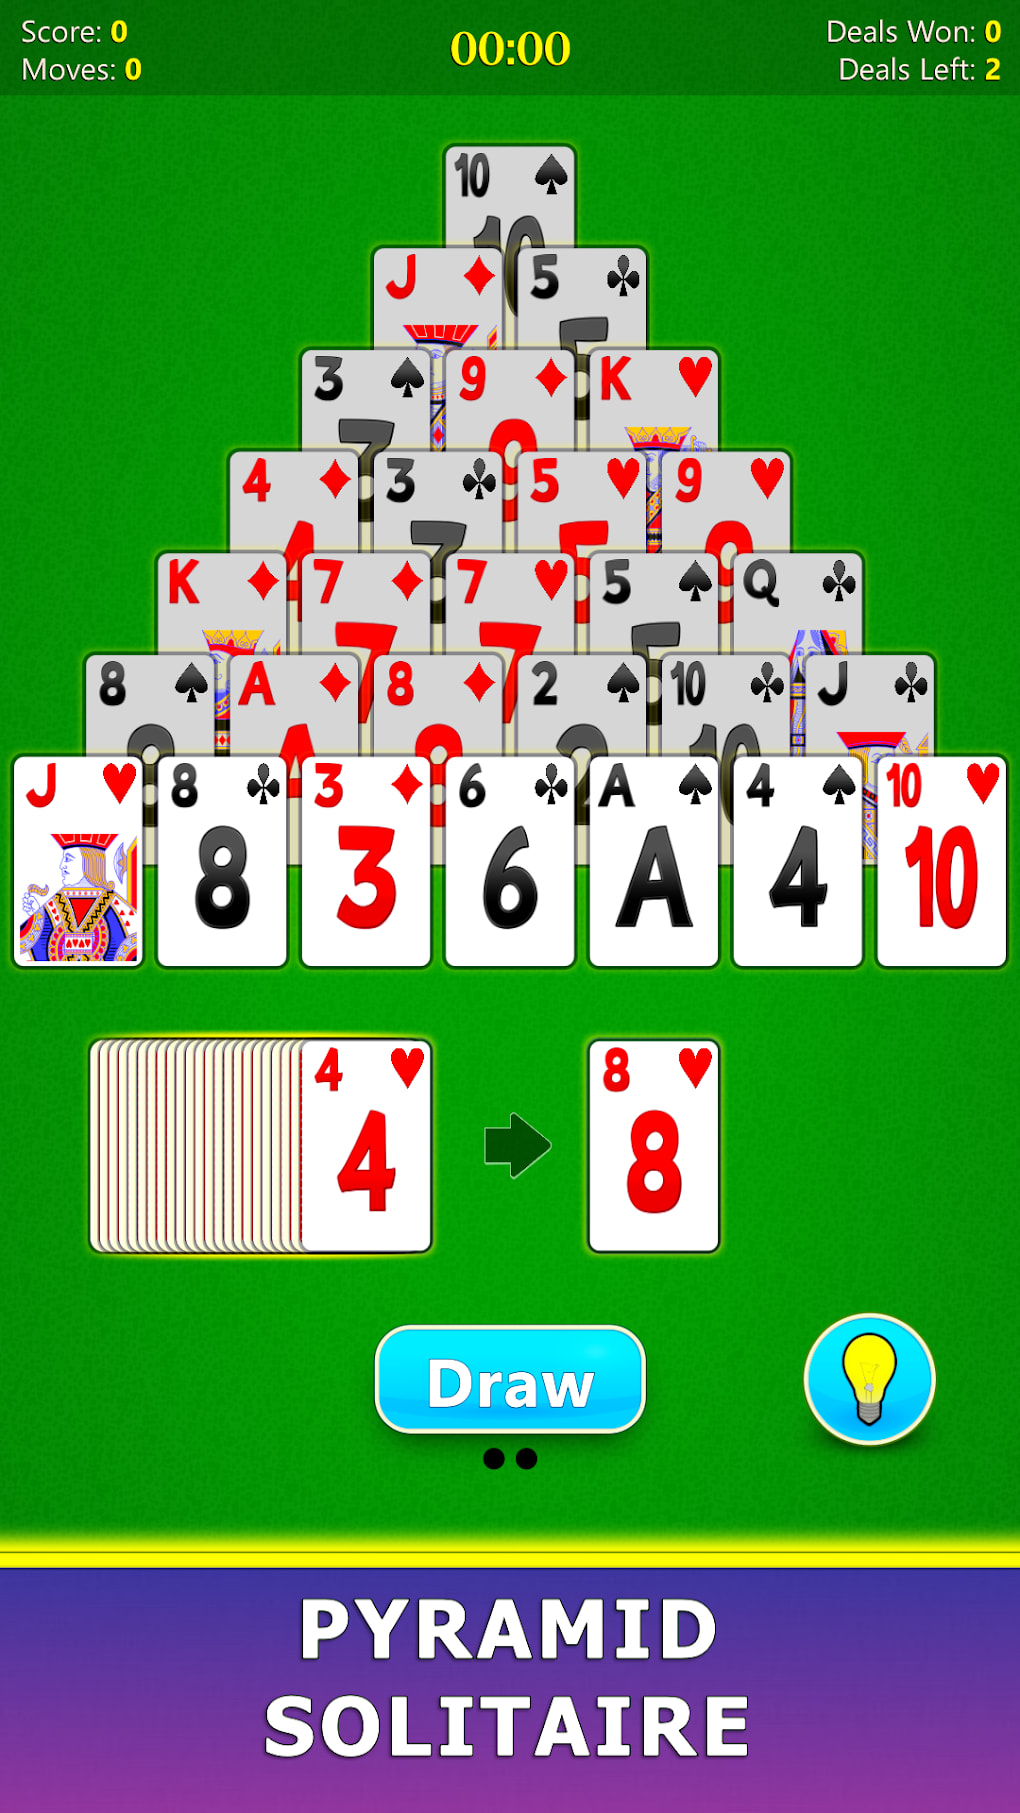 Spider Solitaire: Play for free on your smartphone and tablet! - Jogatina  Apps